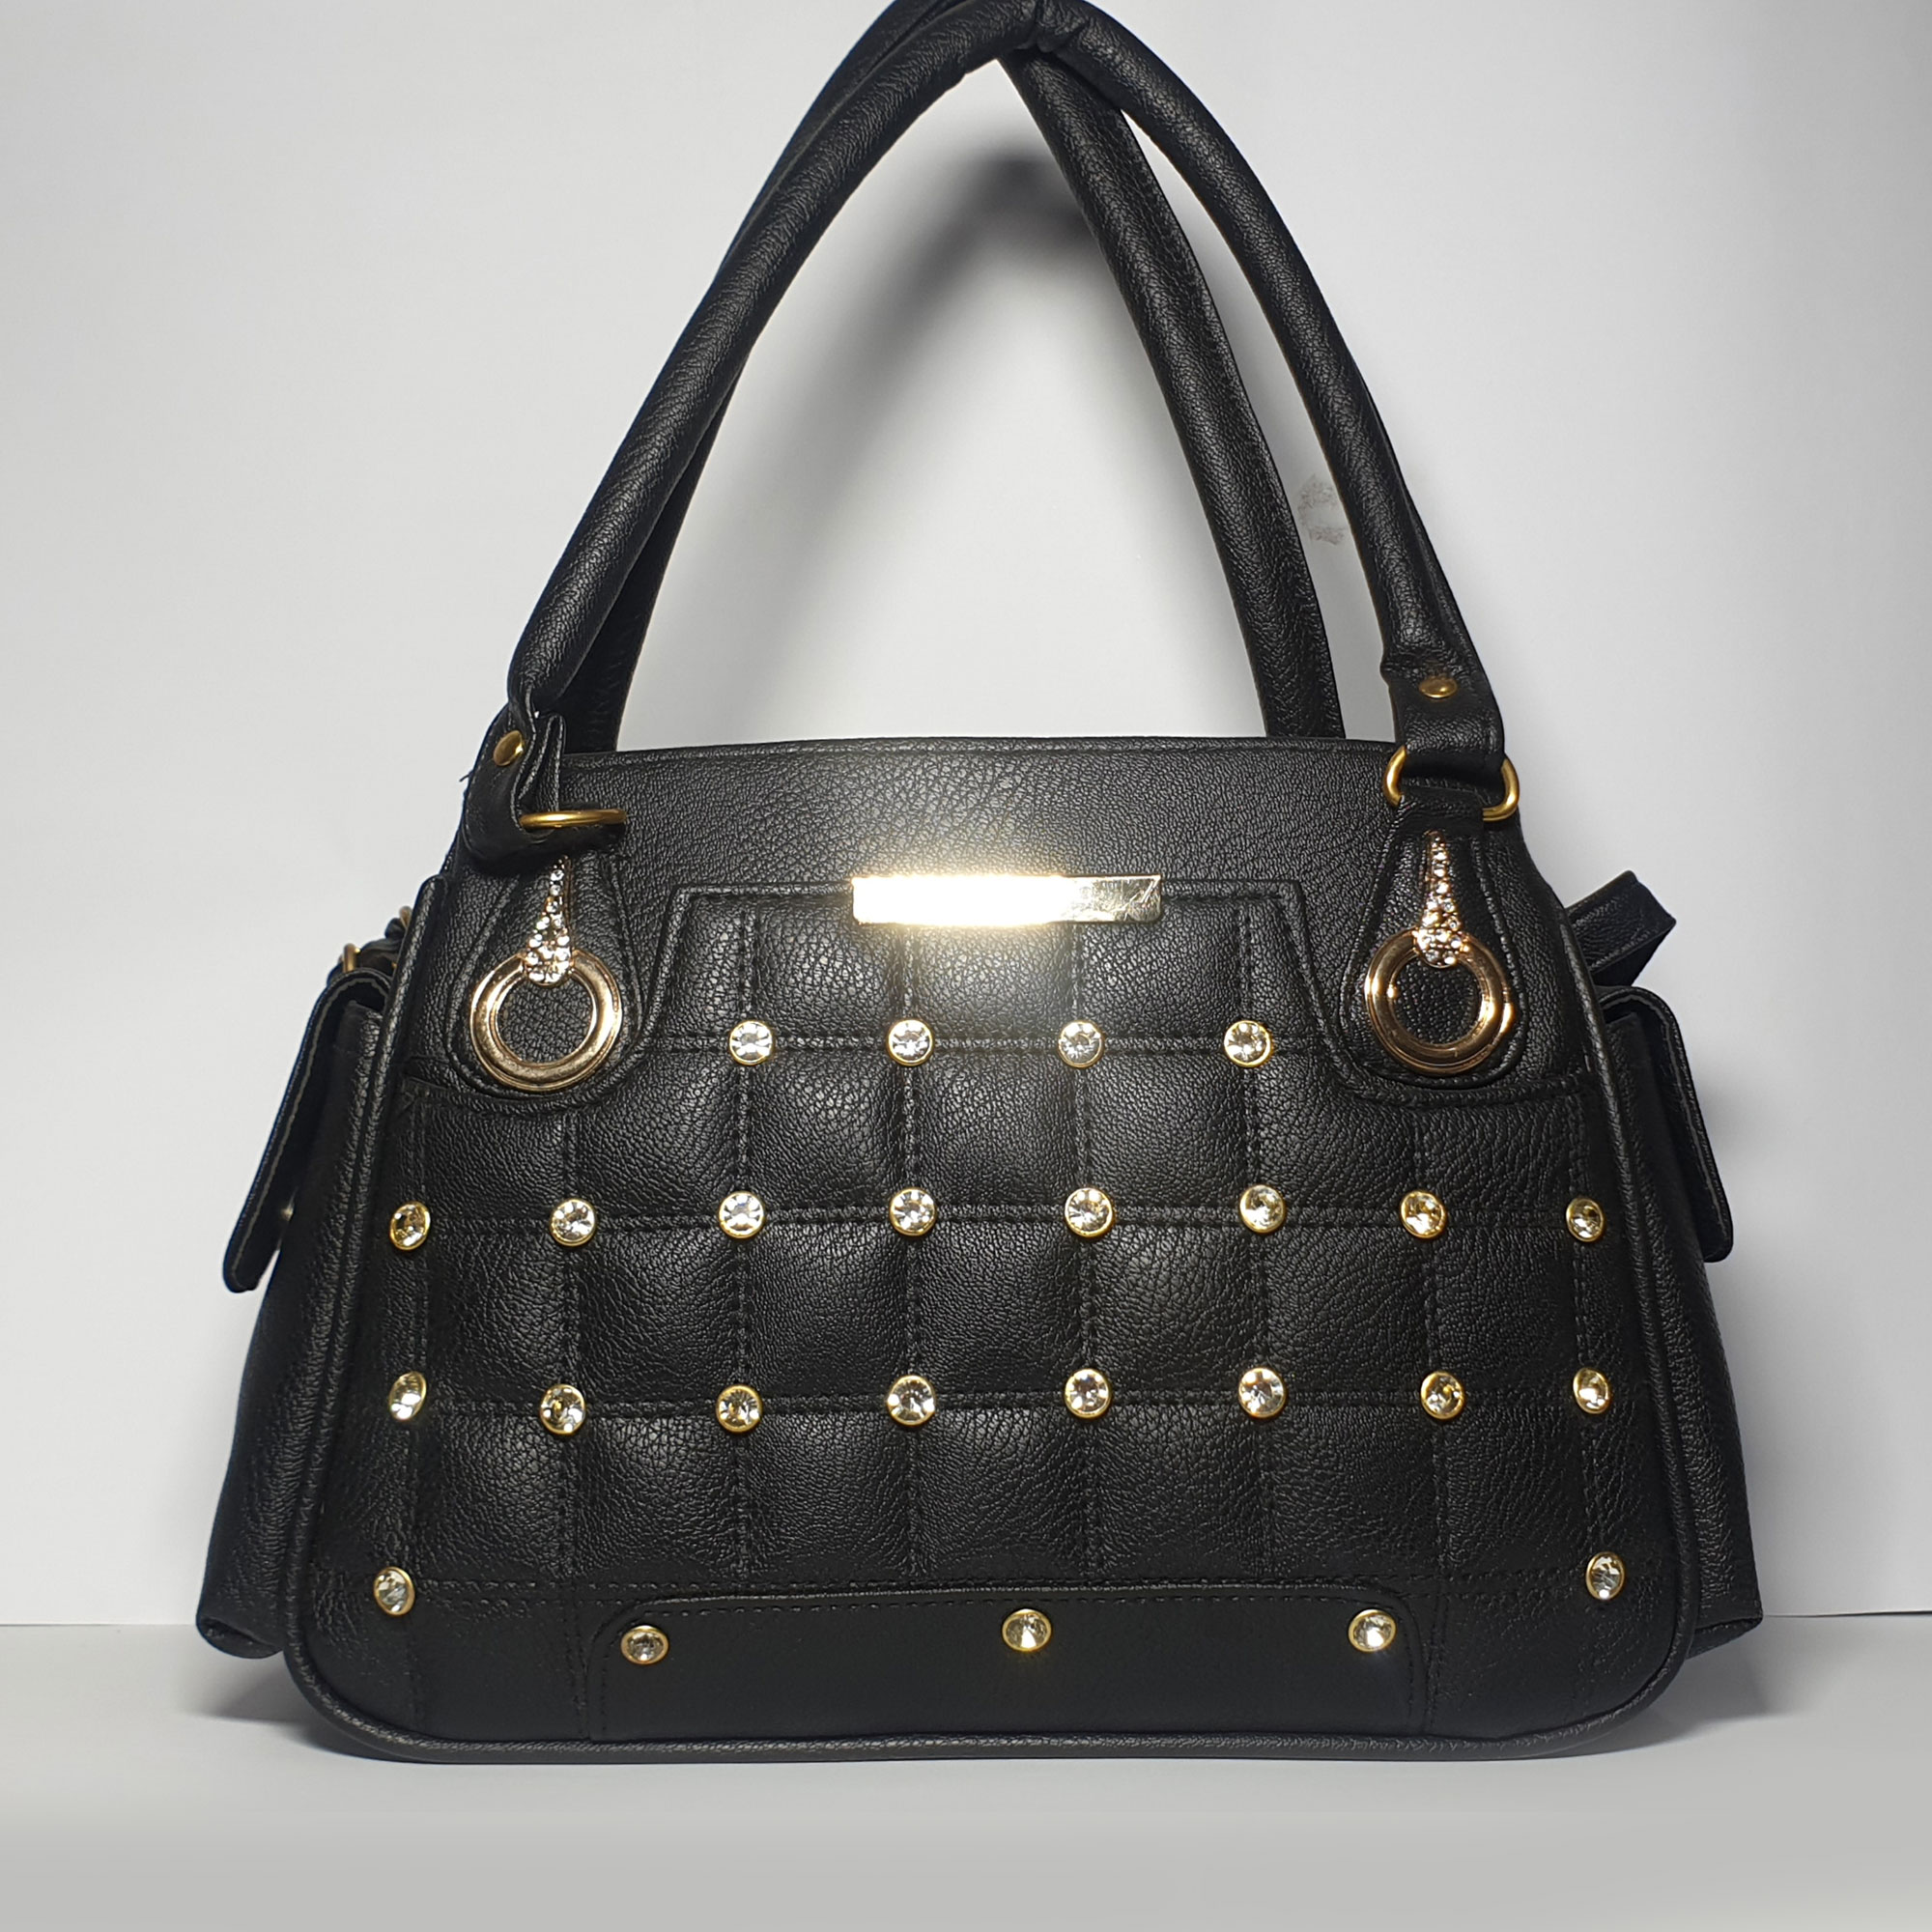 Black Hand Bag for Women with Stones / Purse for Ladies - GutsPK